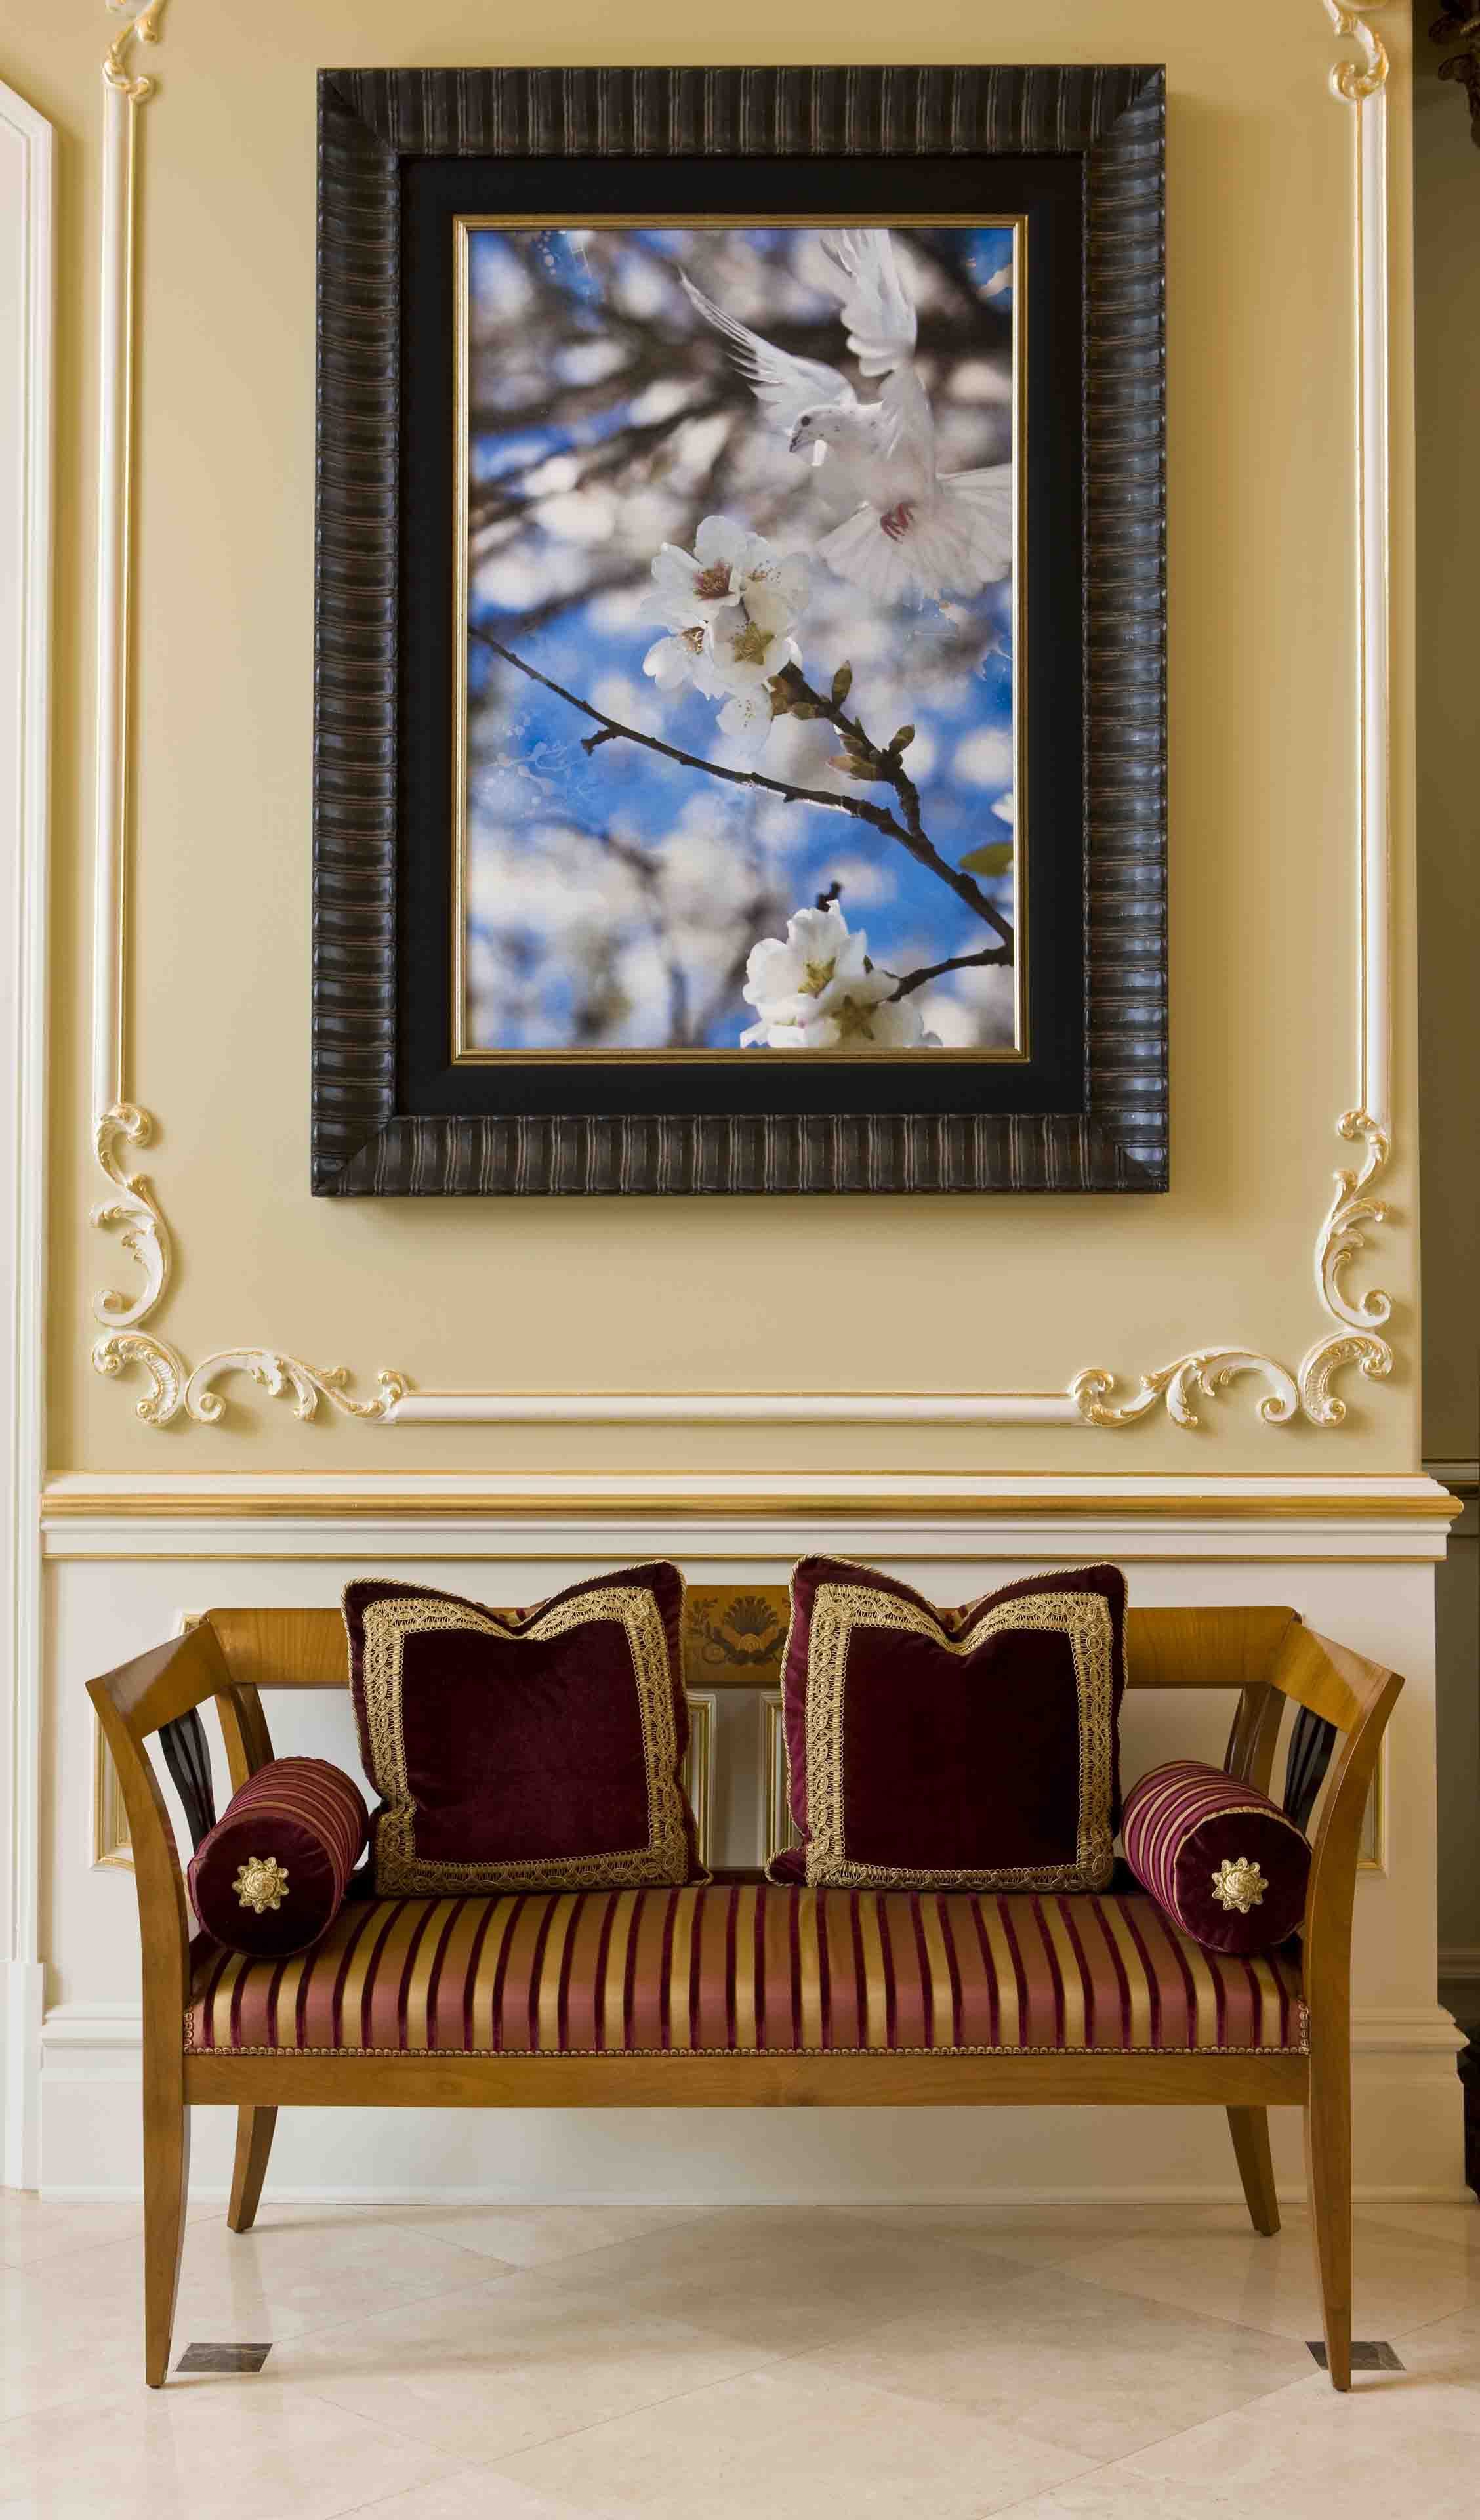 Classical seating with burgundy and gold pillows and painting of a white bird